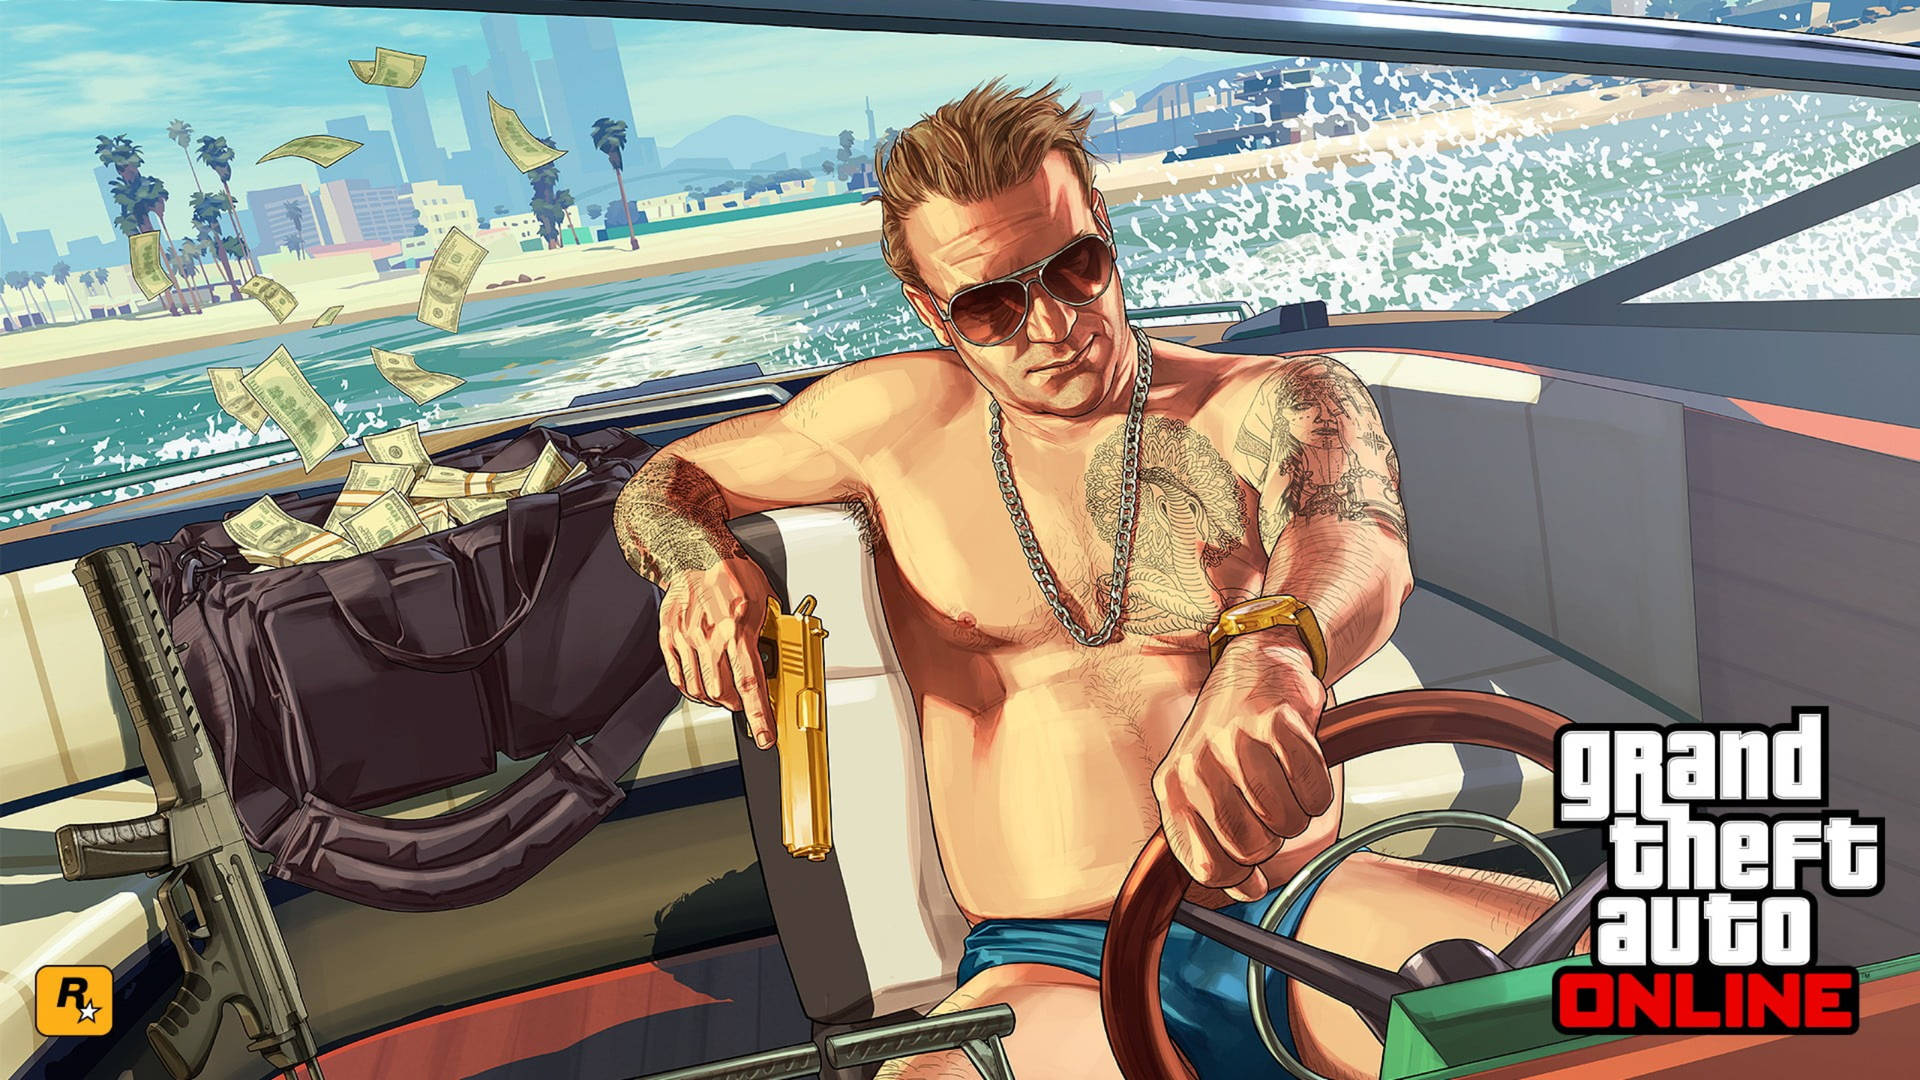 Grand Theft Auto Online On Boat Wallpaper